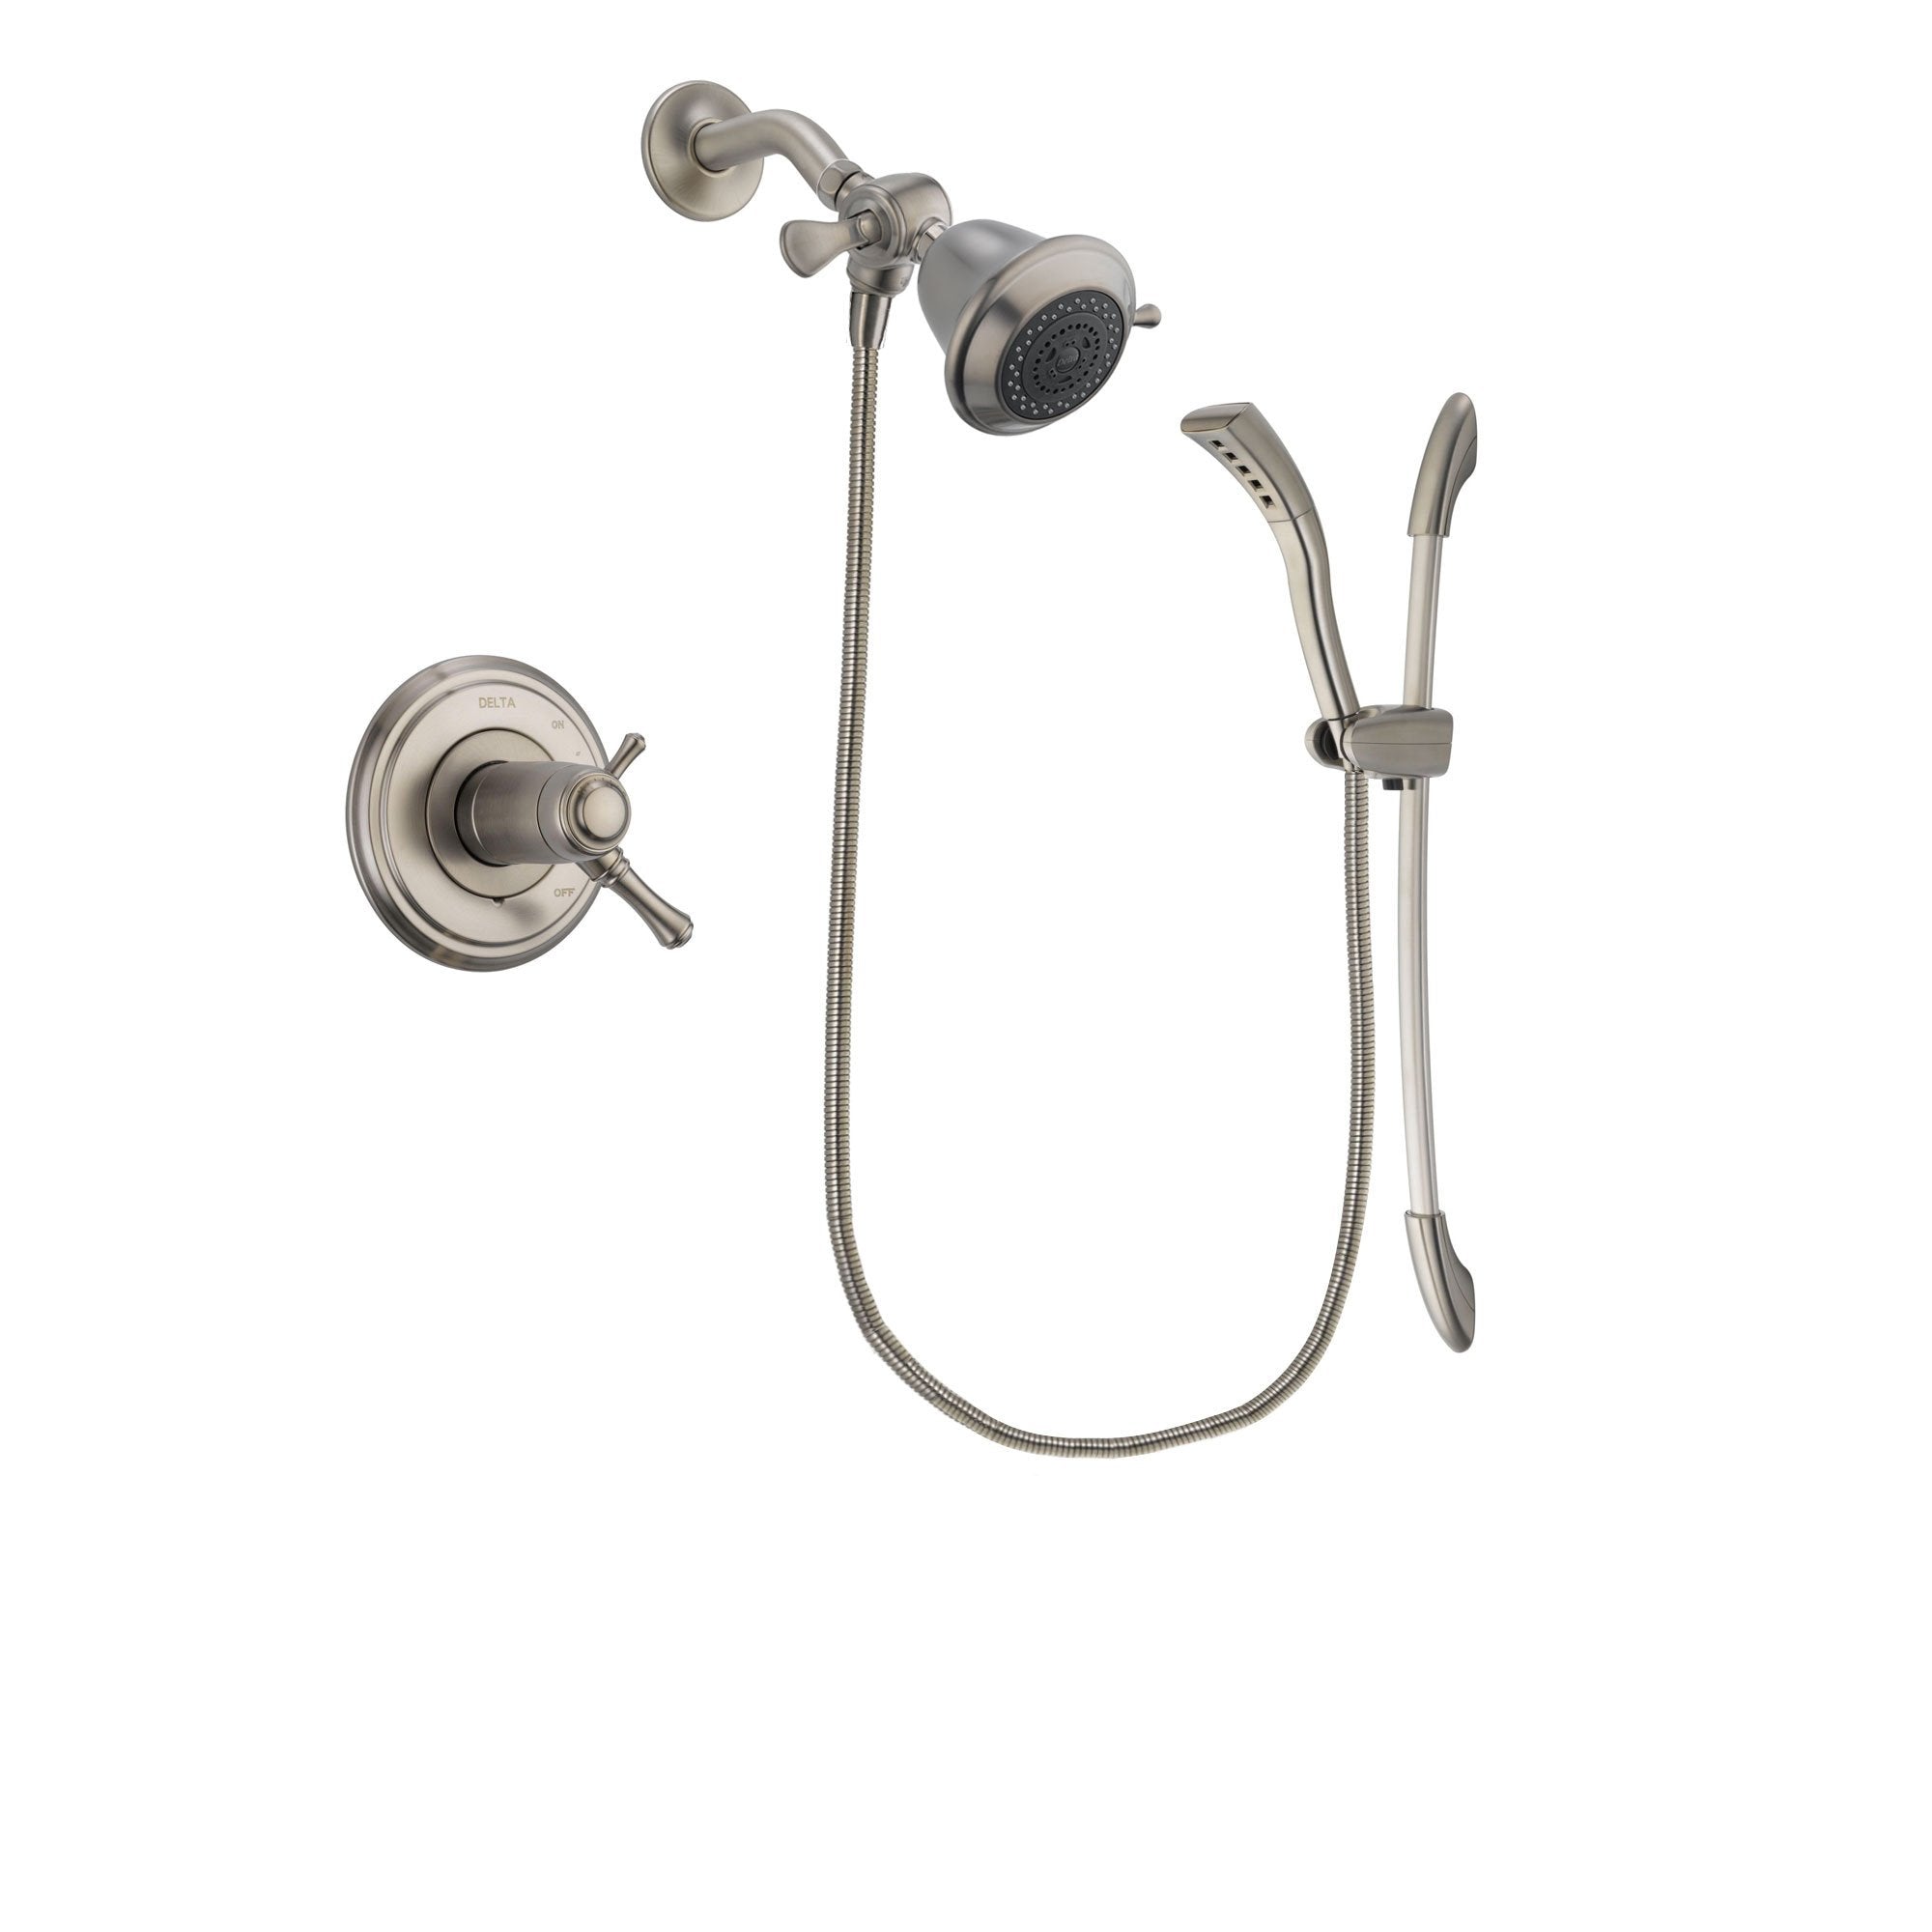 Delta Cassidy Stainless Steel Finish Thermostatic Shower Faucet System Package with Shower Head and Handshower with Slide Bar Includes Rough-in Valve DSP1386V